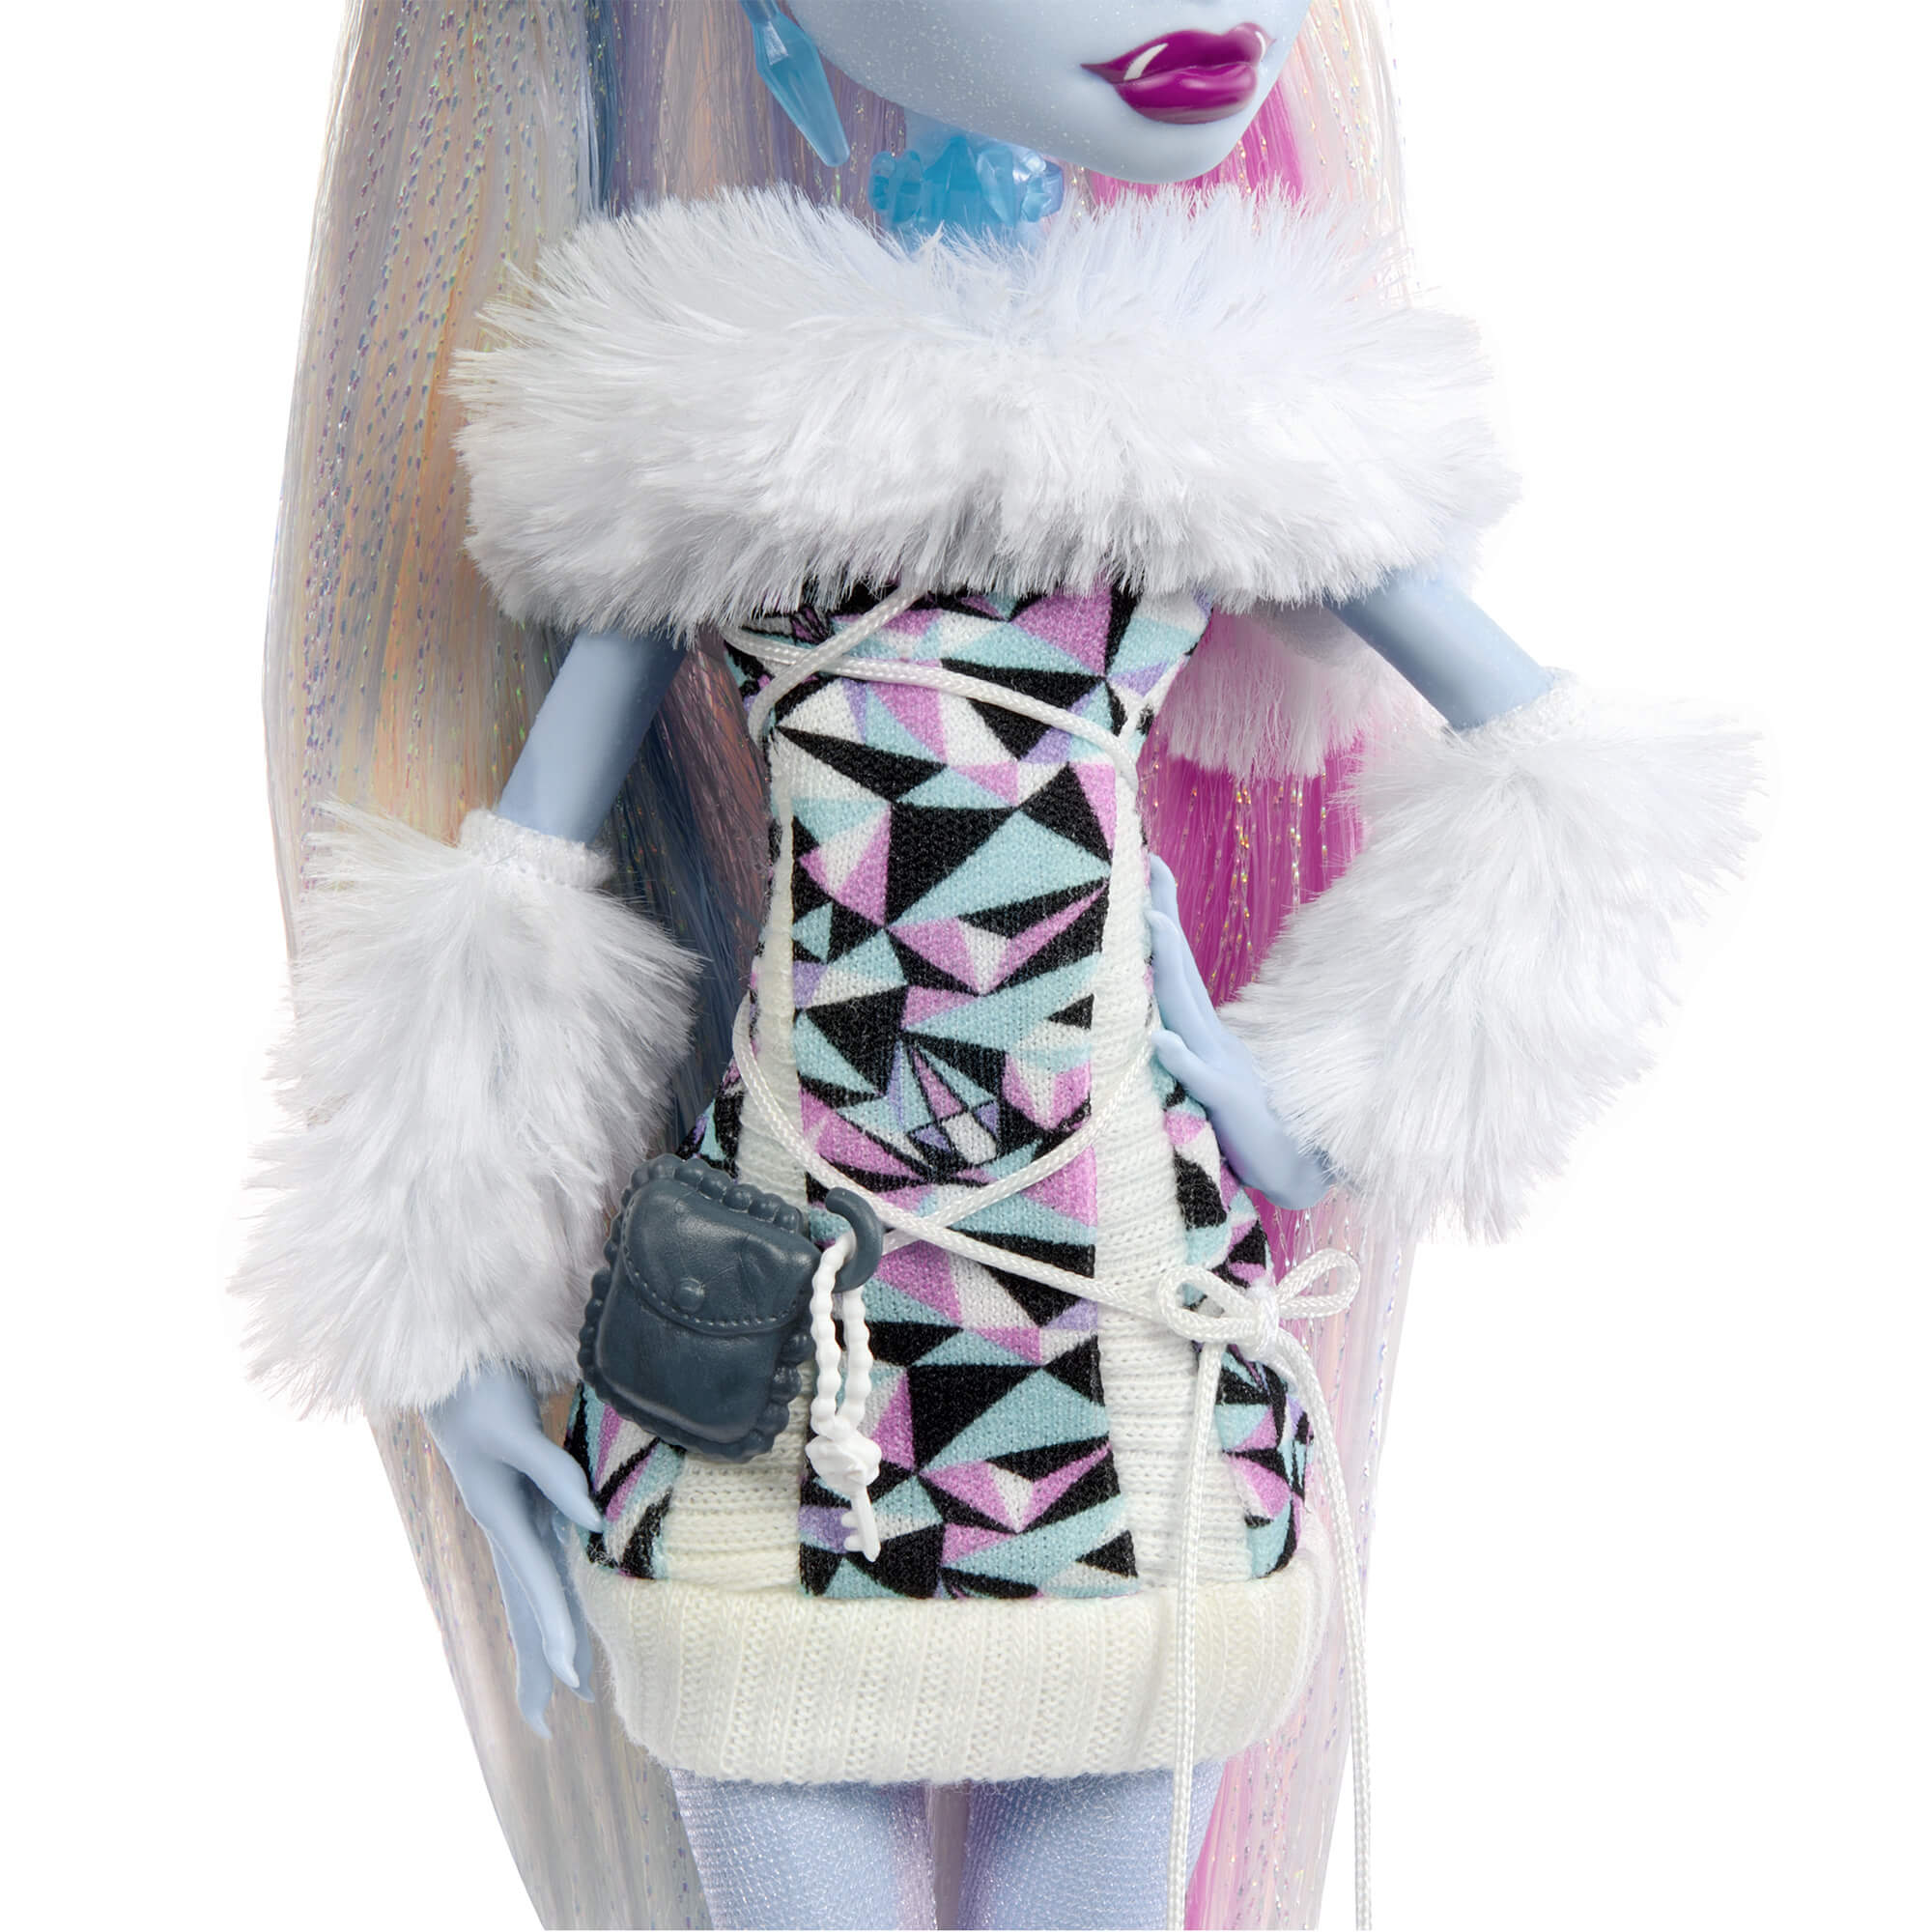 Monster High Boo-riginal Creeproduction G1 Abbey Bominable Doll